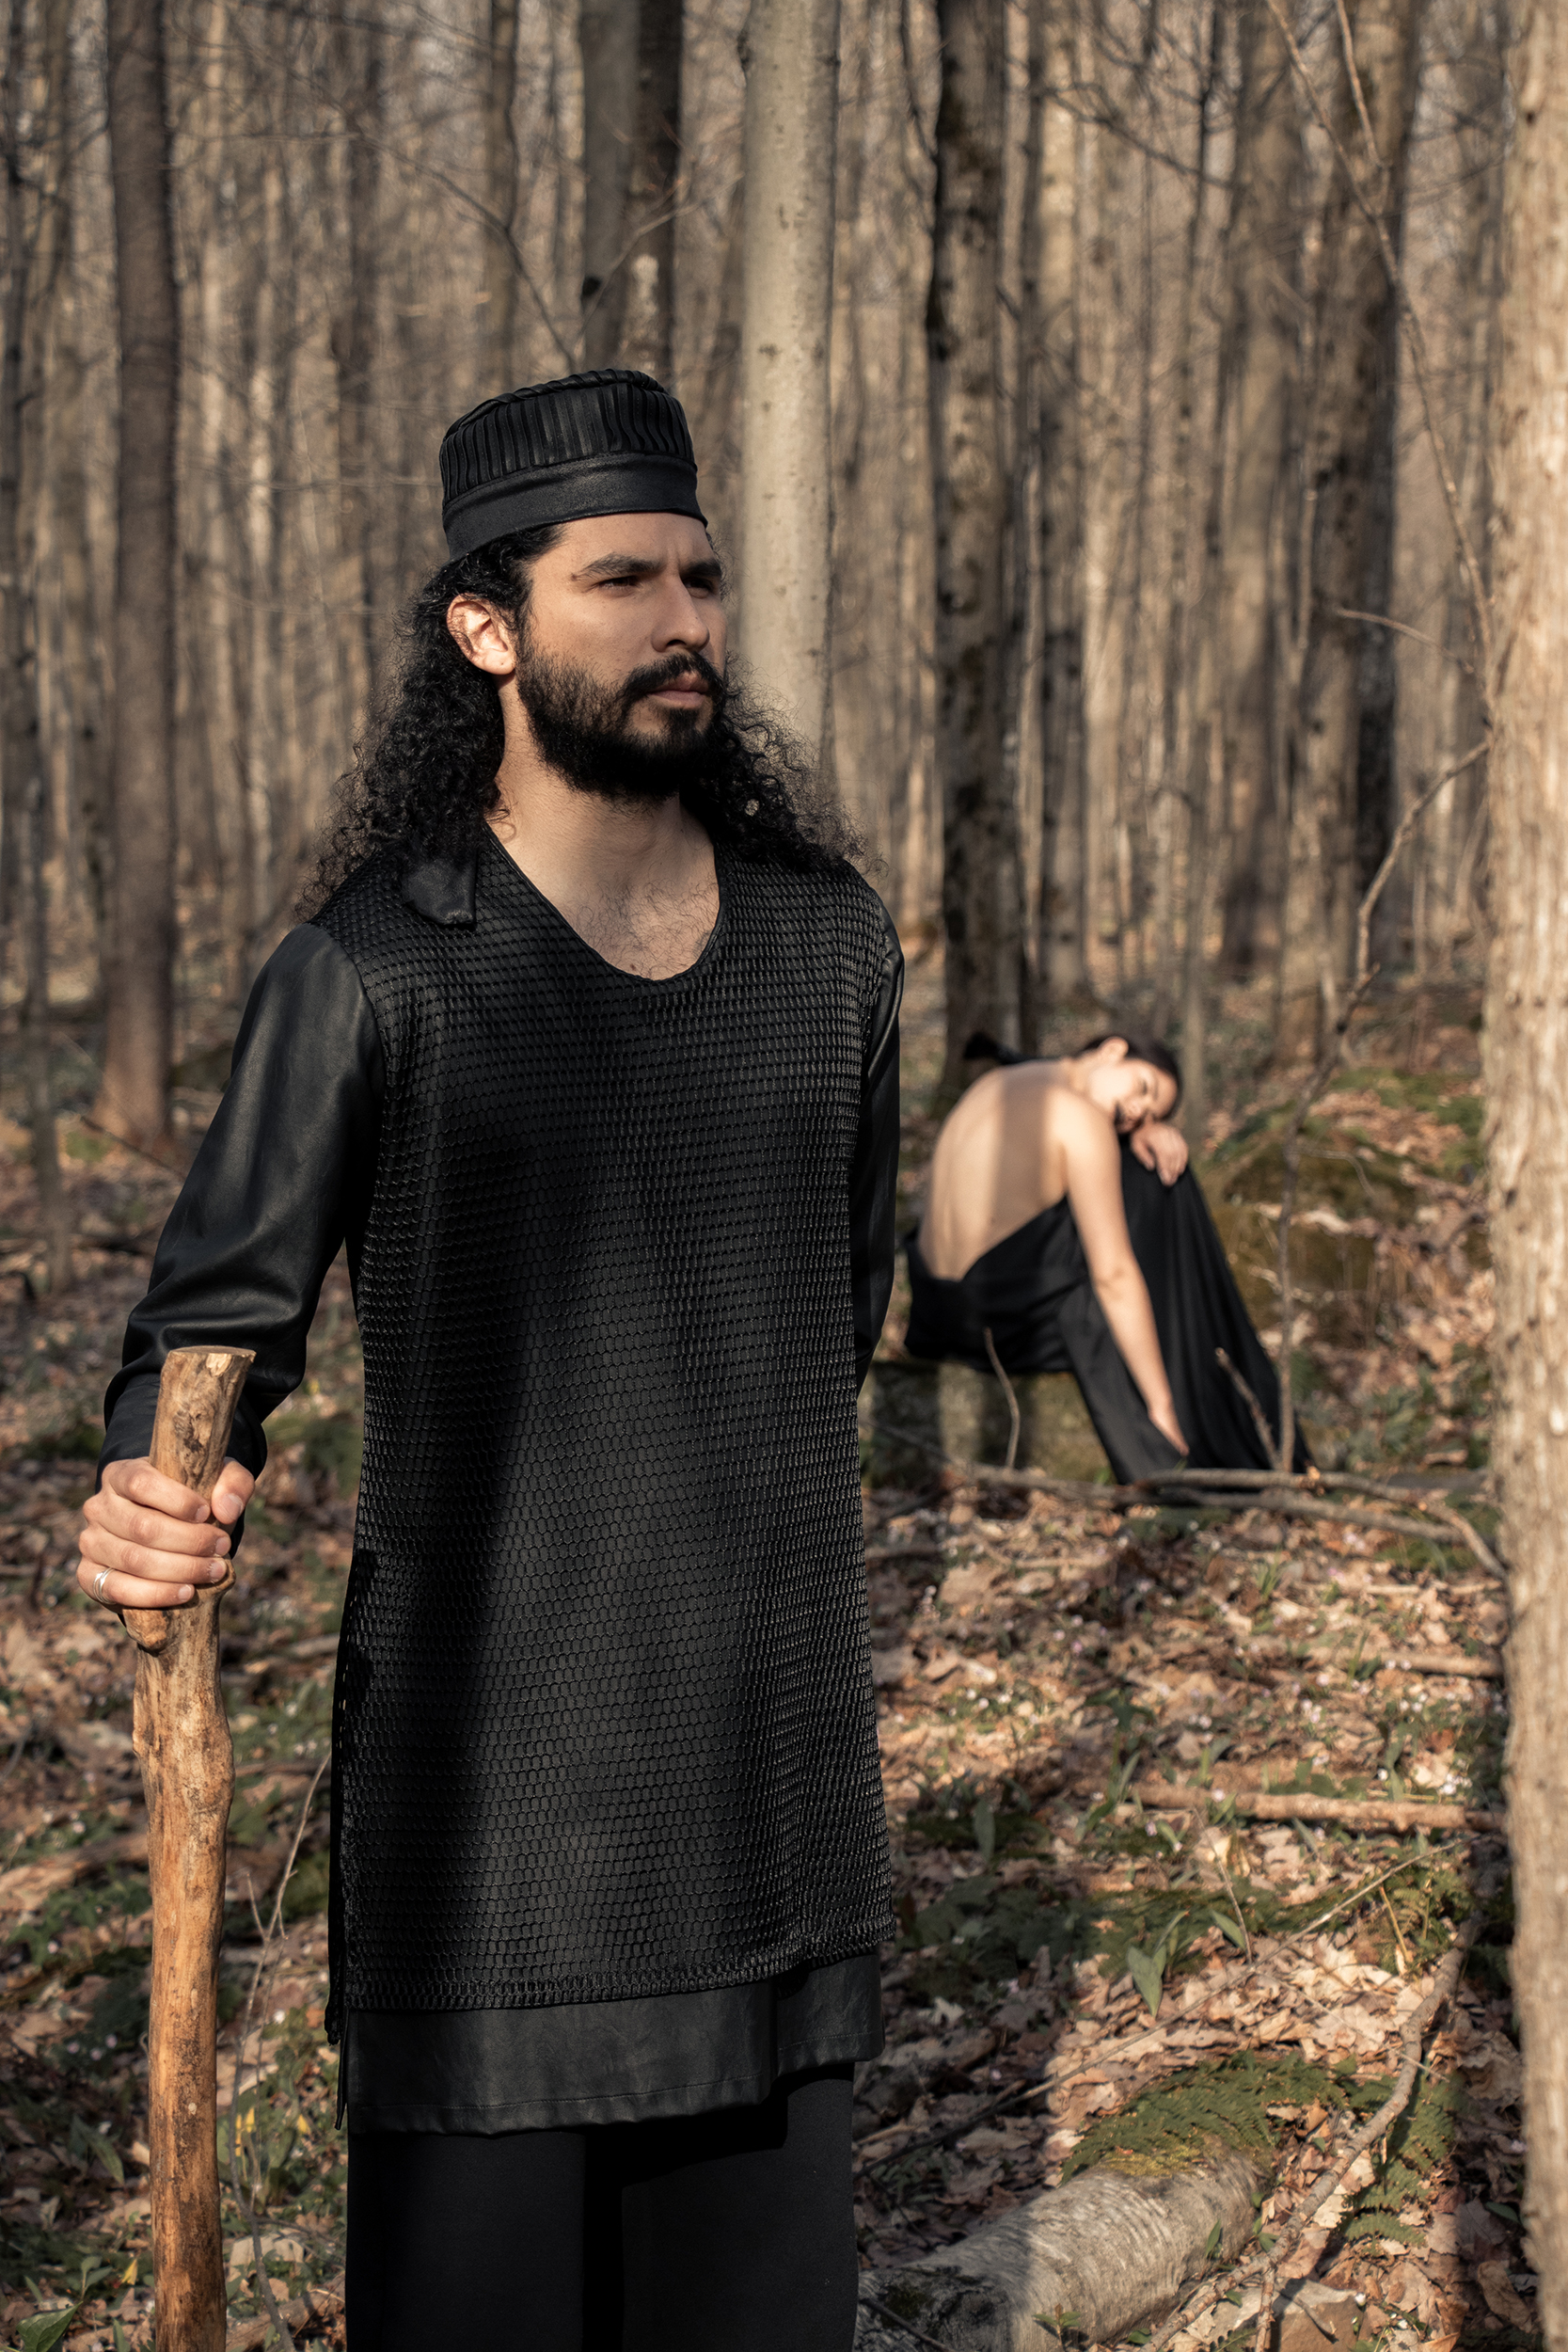 Man wearing black tunic and organic black sweatpants in the woods with woman in the background